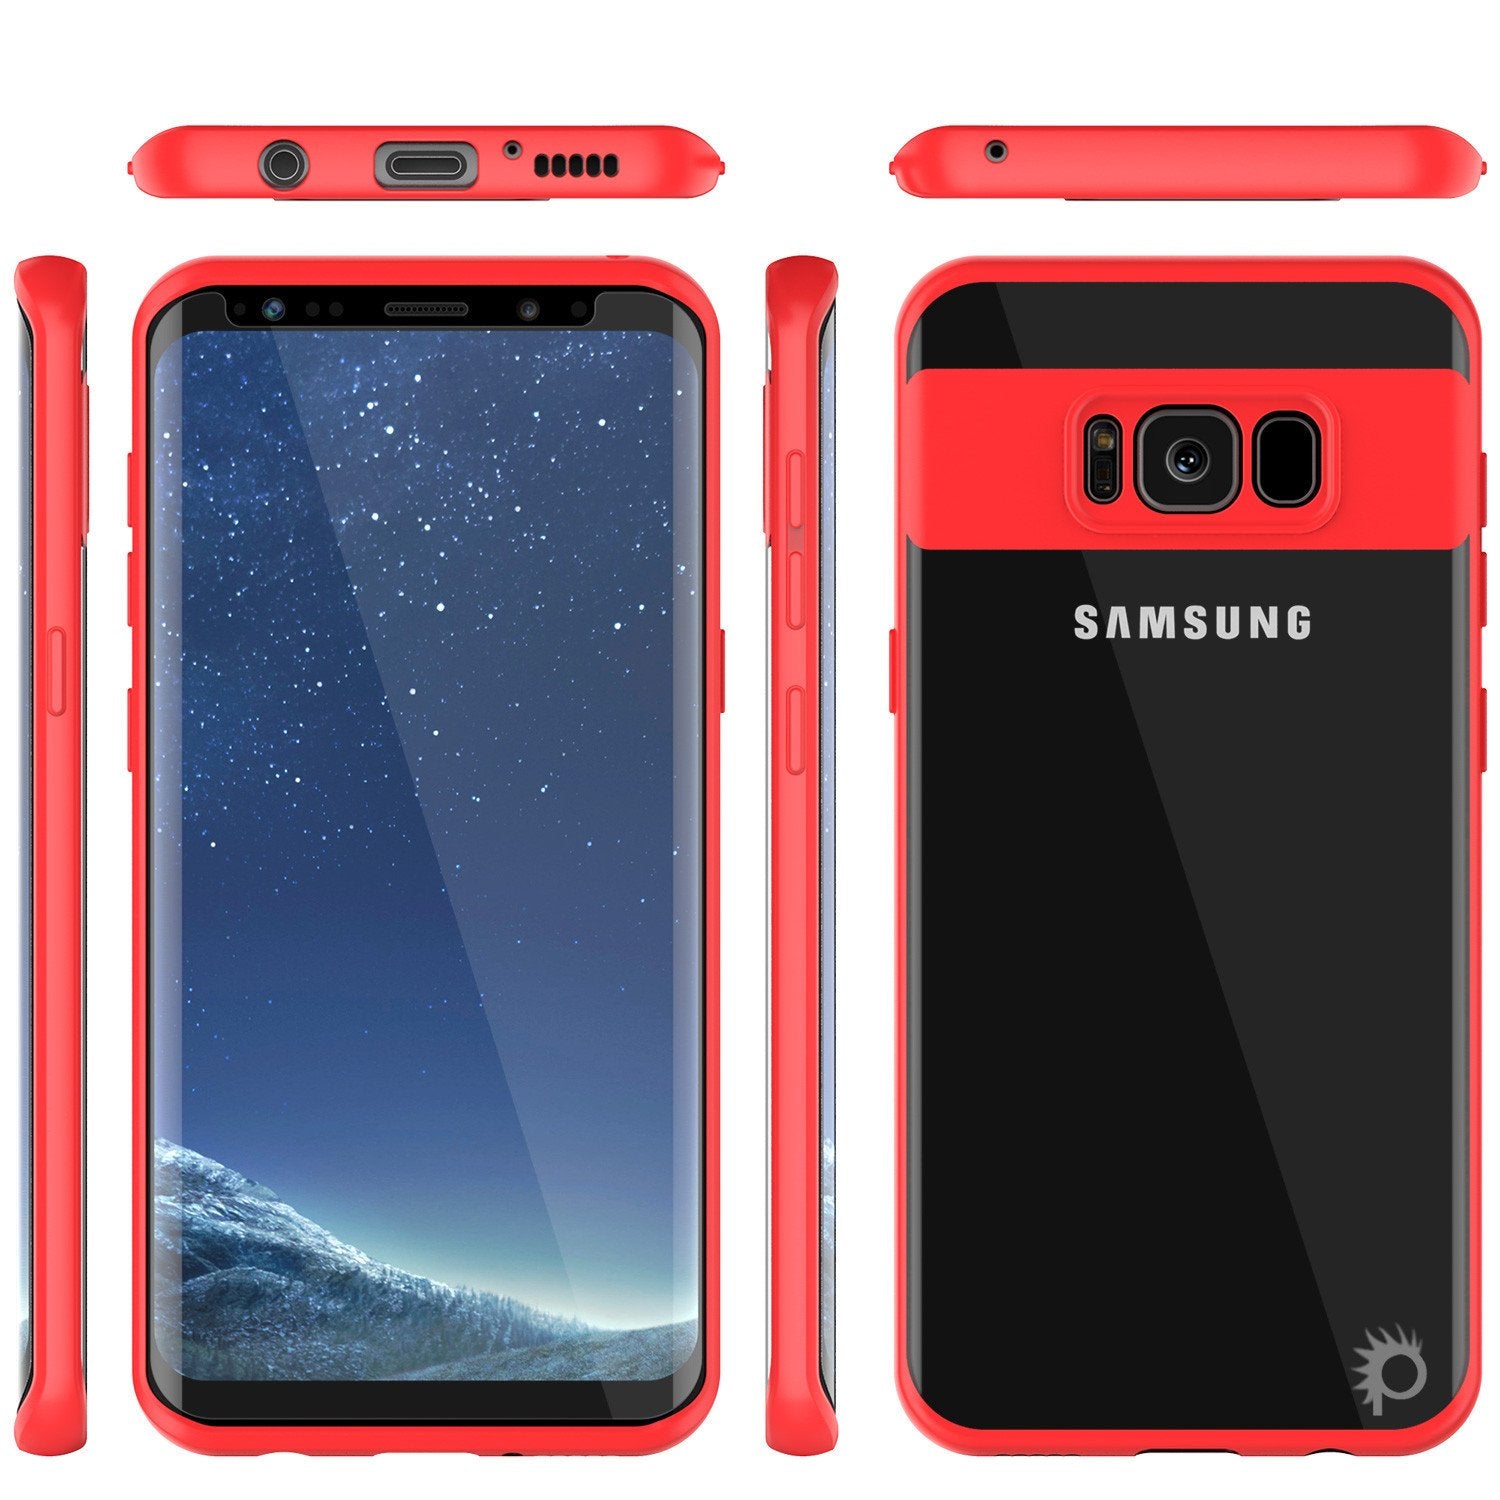 Galaxy S8 Plus Case, Punkcase [MASK Series] [RED] Full Body Hybrid Dual Layer TPU Cover W/ Protective PUNKSHIELD Screen Protector - PunkCase NZ